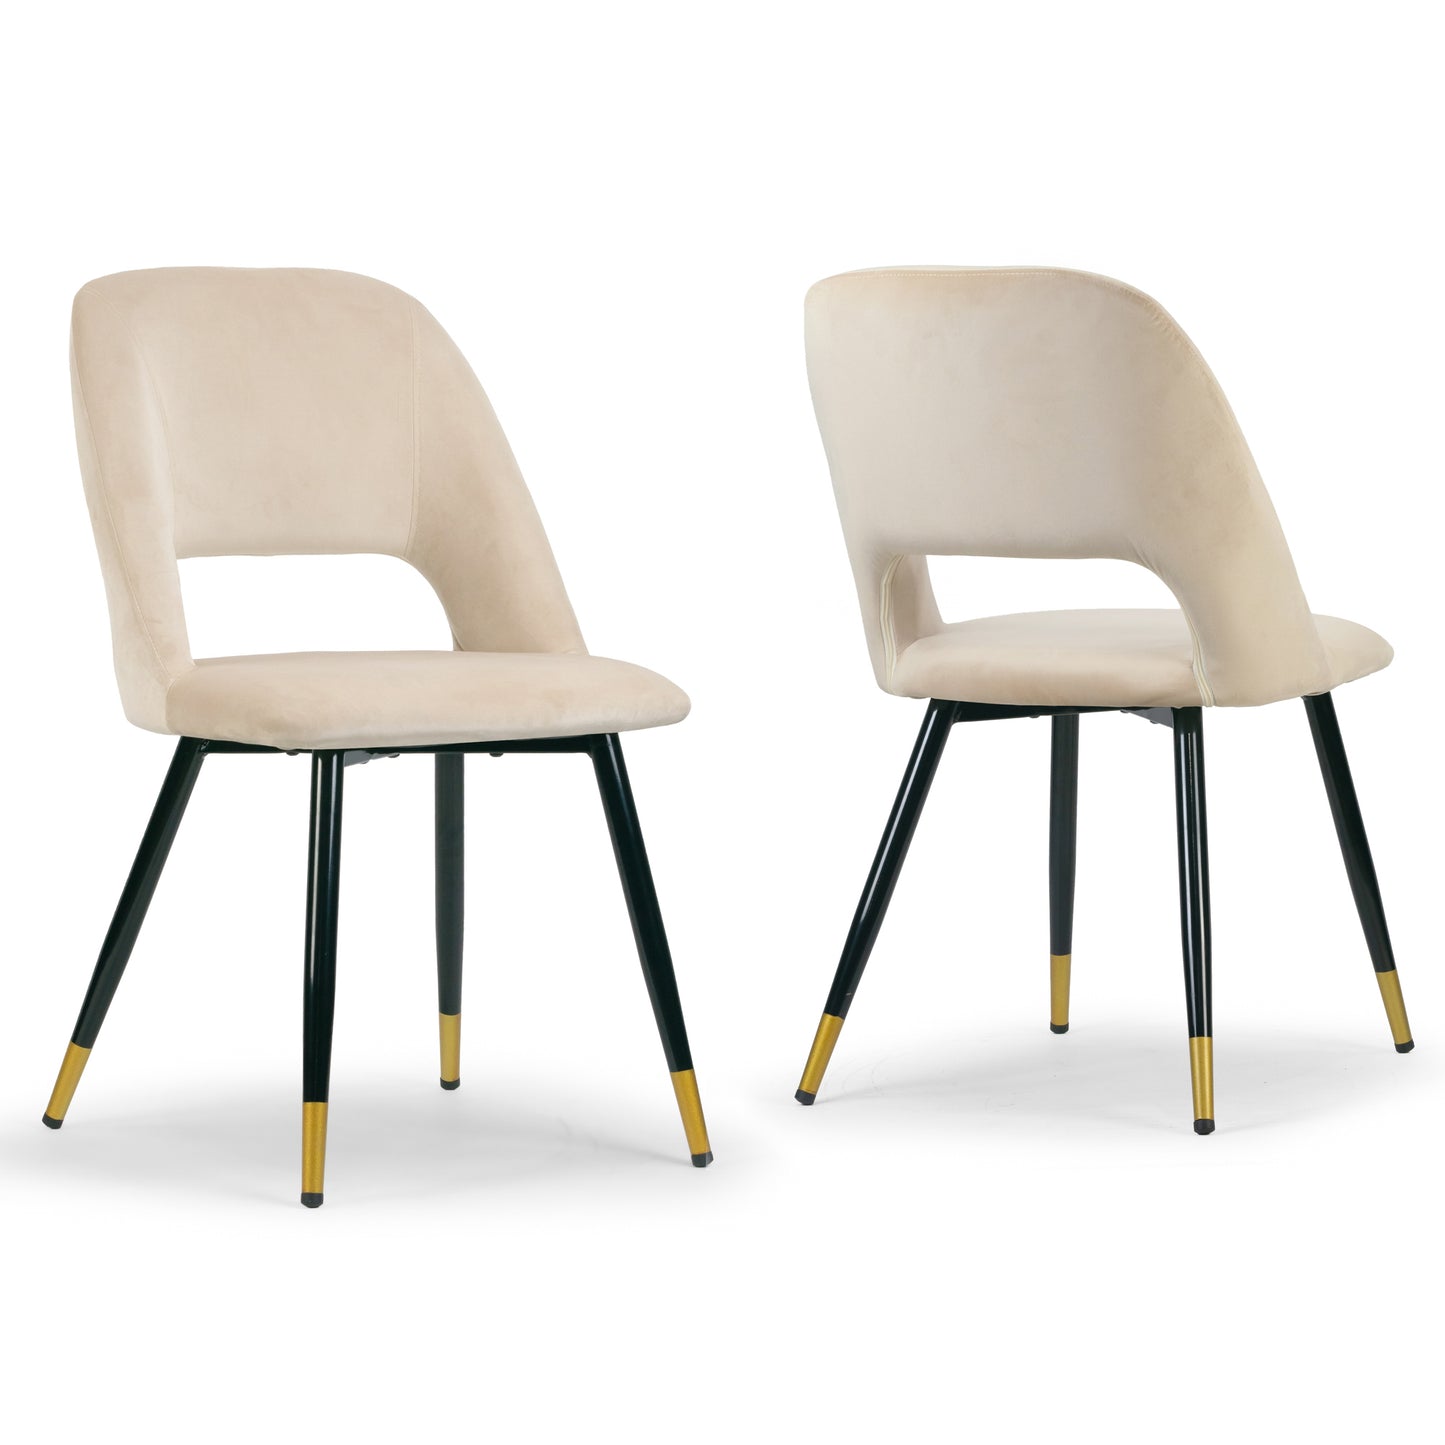 Set of 2 Ania Beige Velvet Dining Chair with Golden Accented Metal Legs